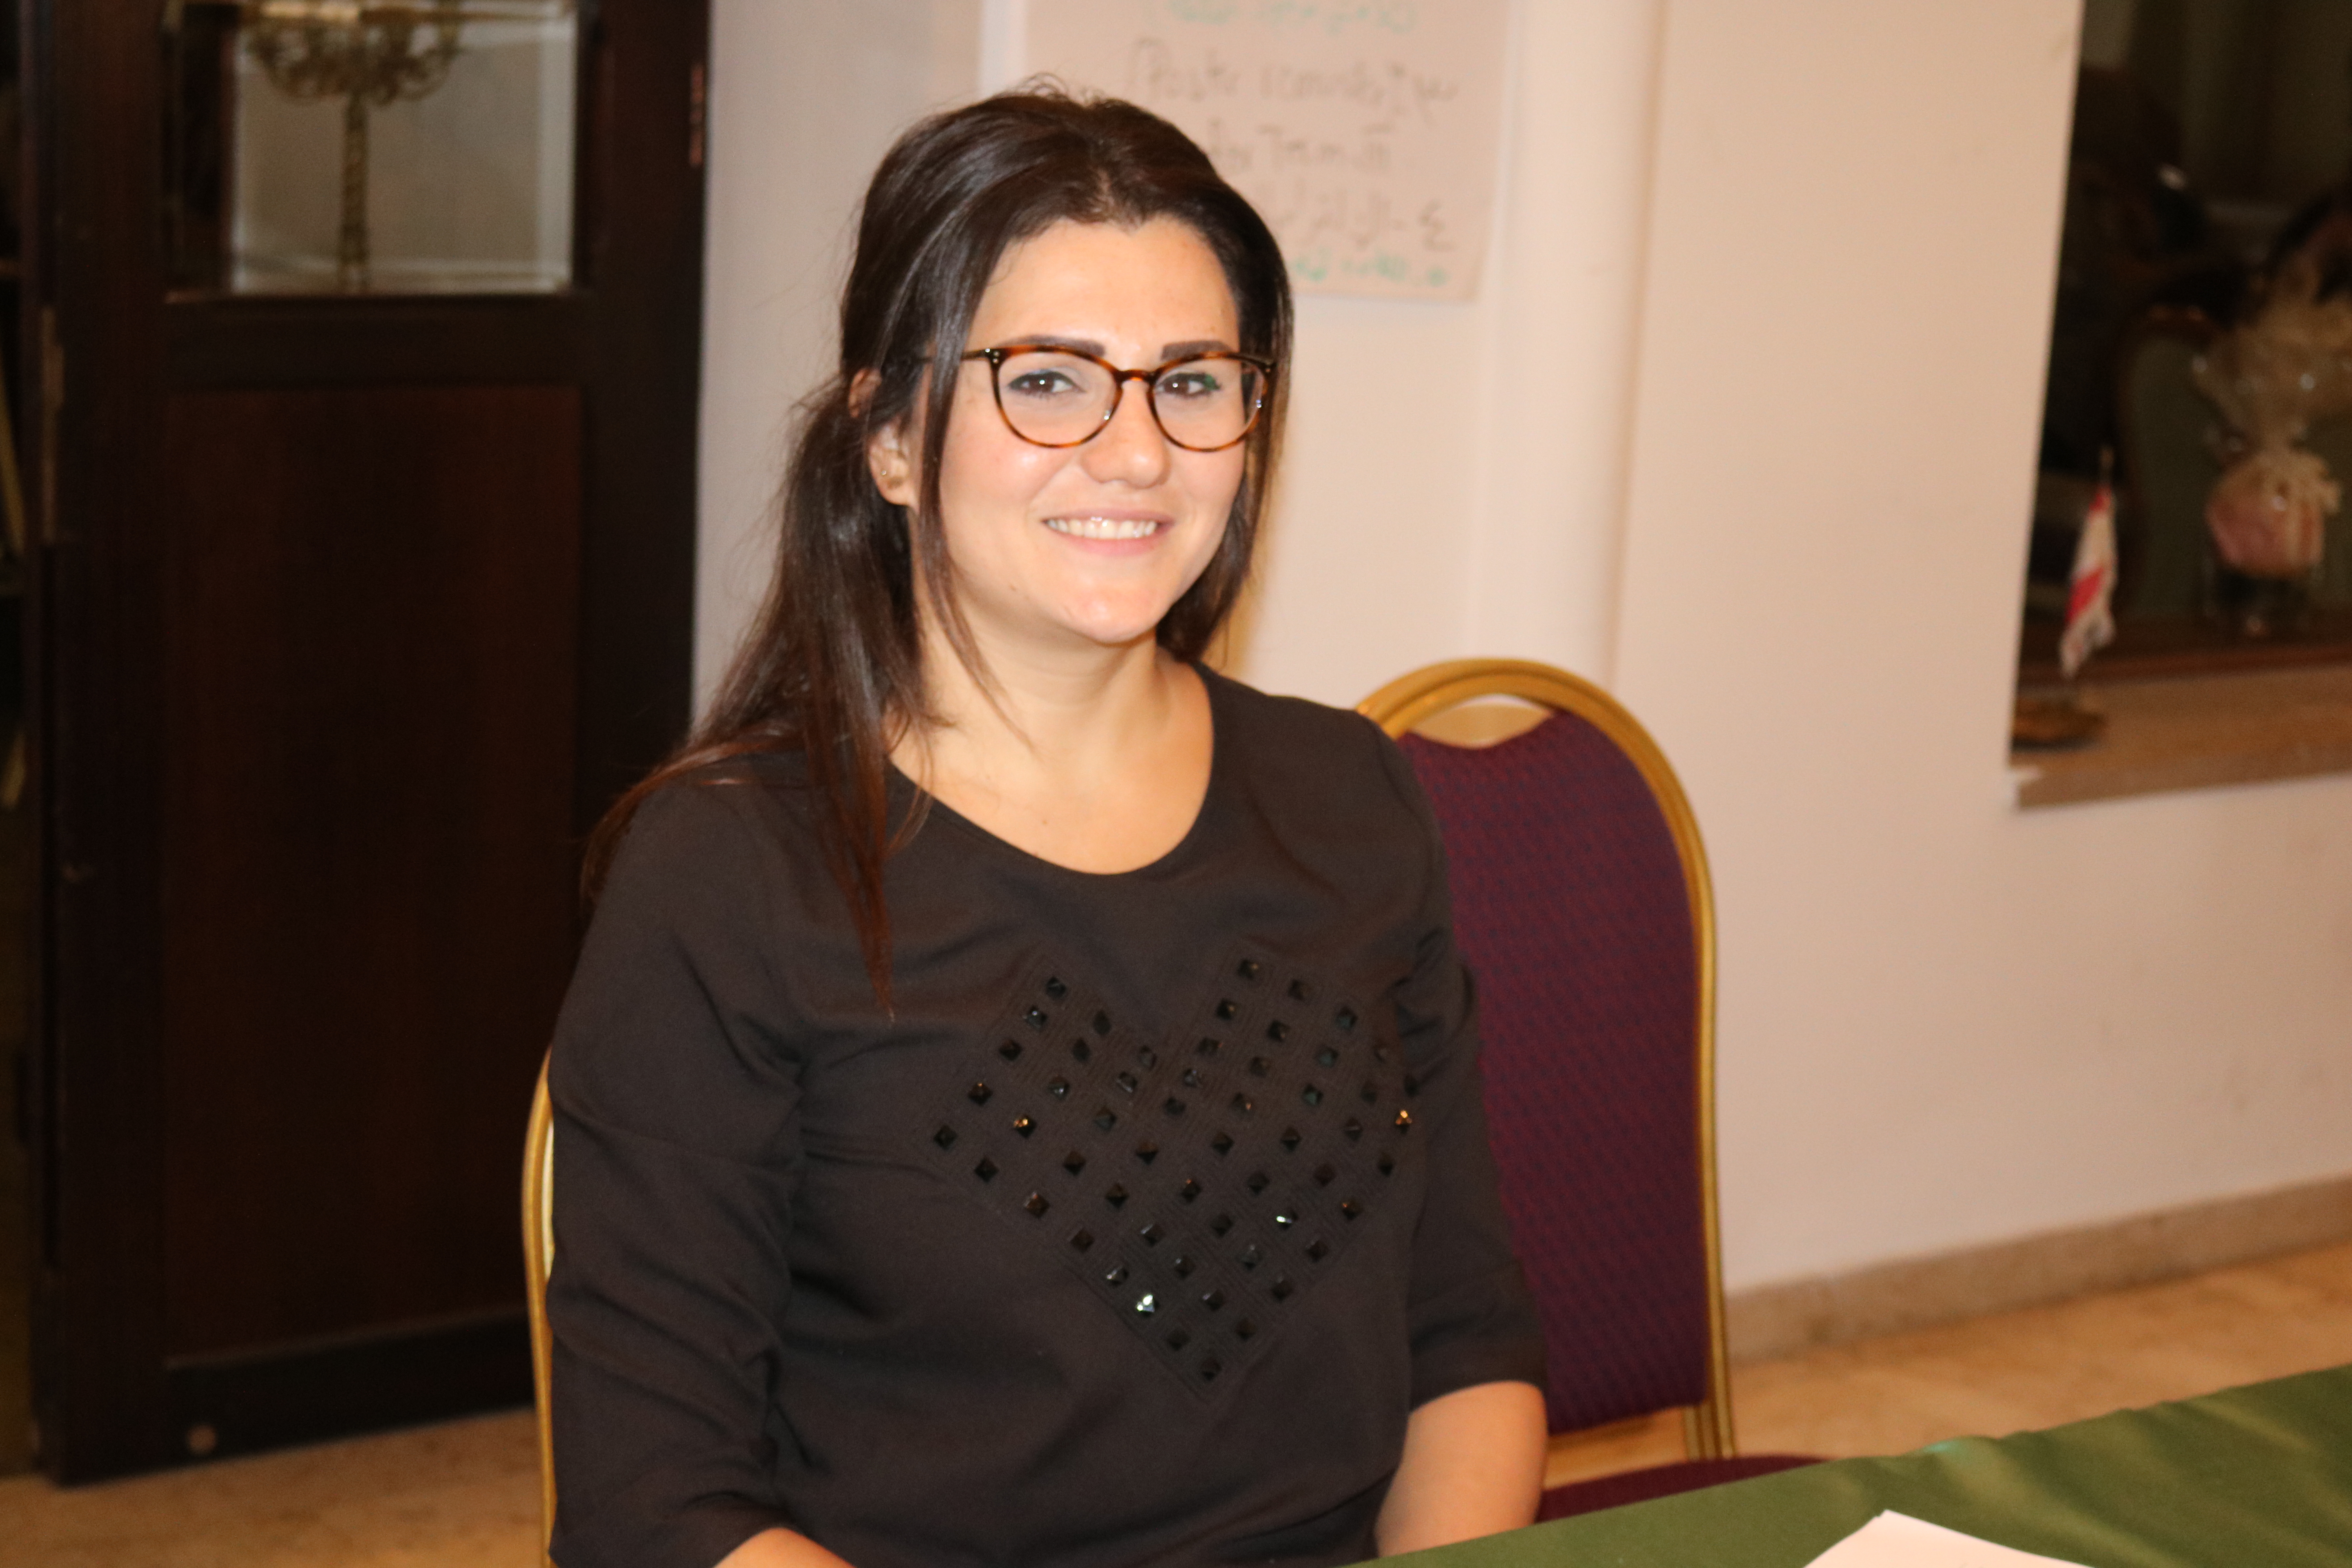 Mayssam Imad, smiling, looks directly at the camera, has long black hair, is wearing brown round glasses and a black shirt